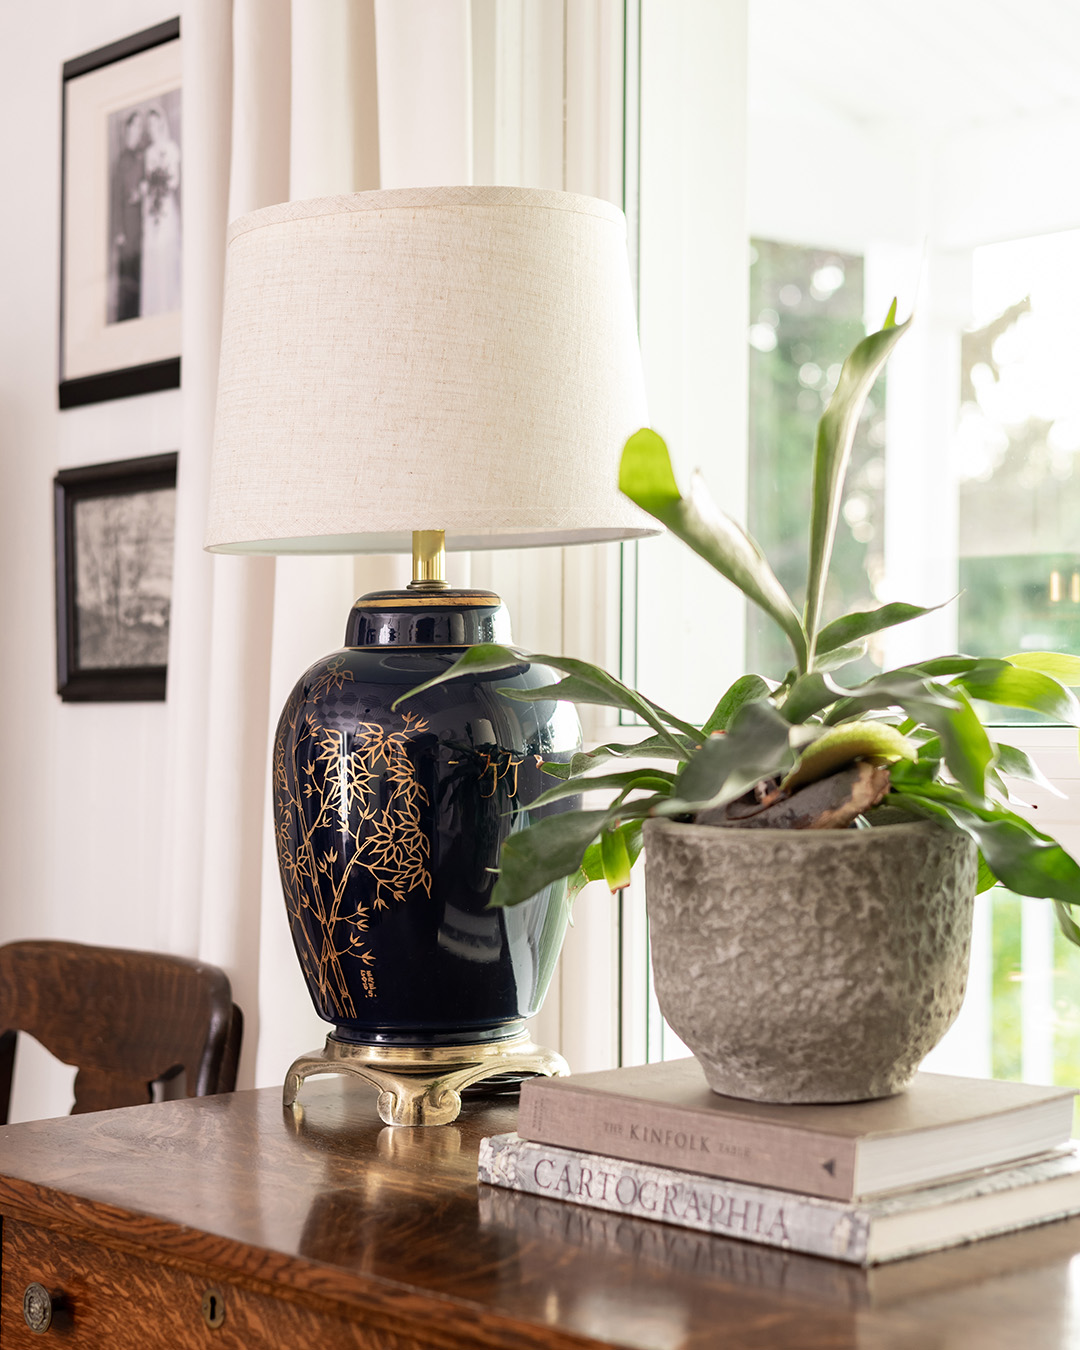 Navy blue chinoiserie lamp with staghorn fern.